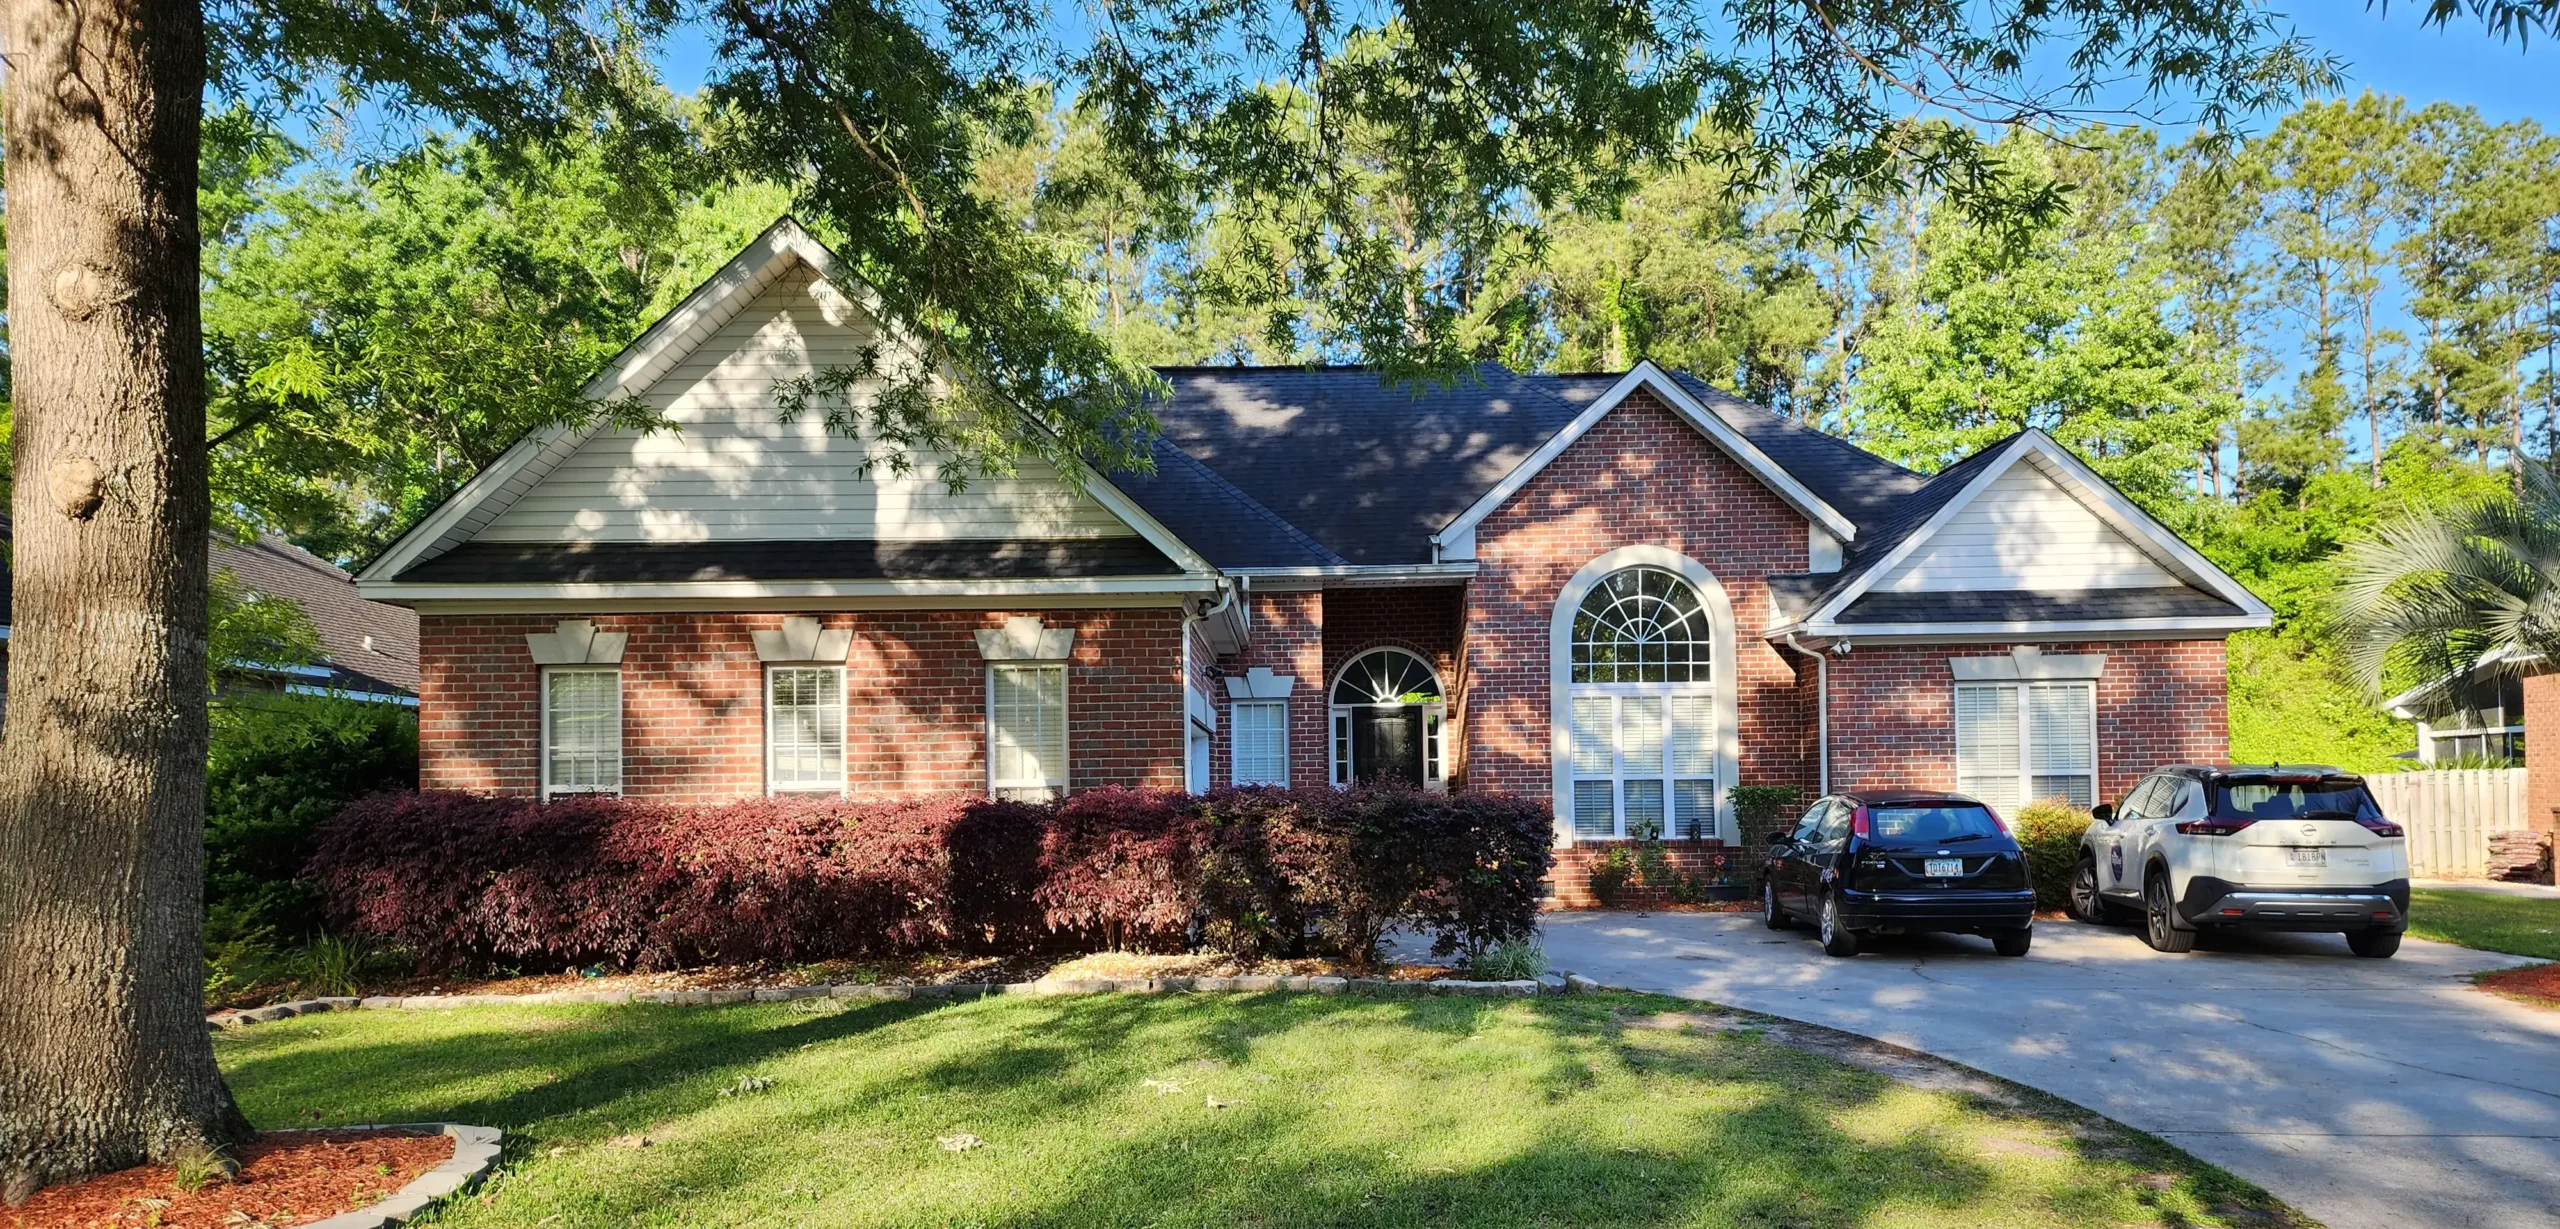 Photo of the front of the homeowner's private brick house for sale by owner living in  the Coosaw Creek Country Club community conveniently located in North Charleston, SC  29420